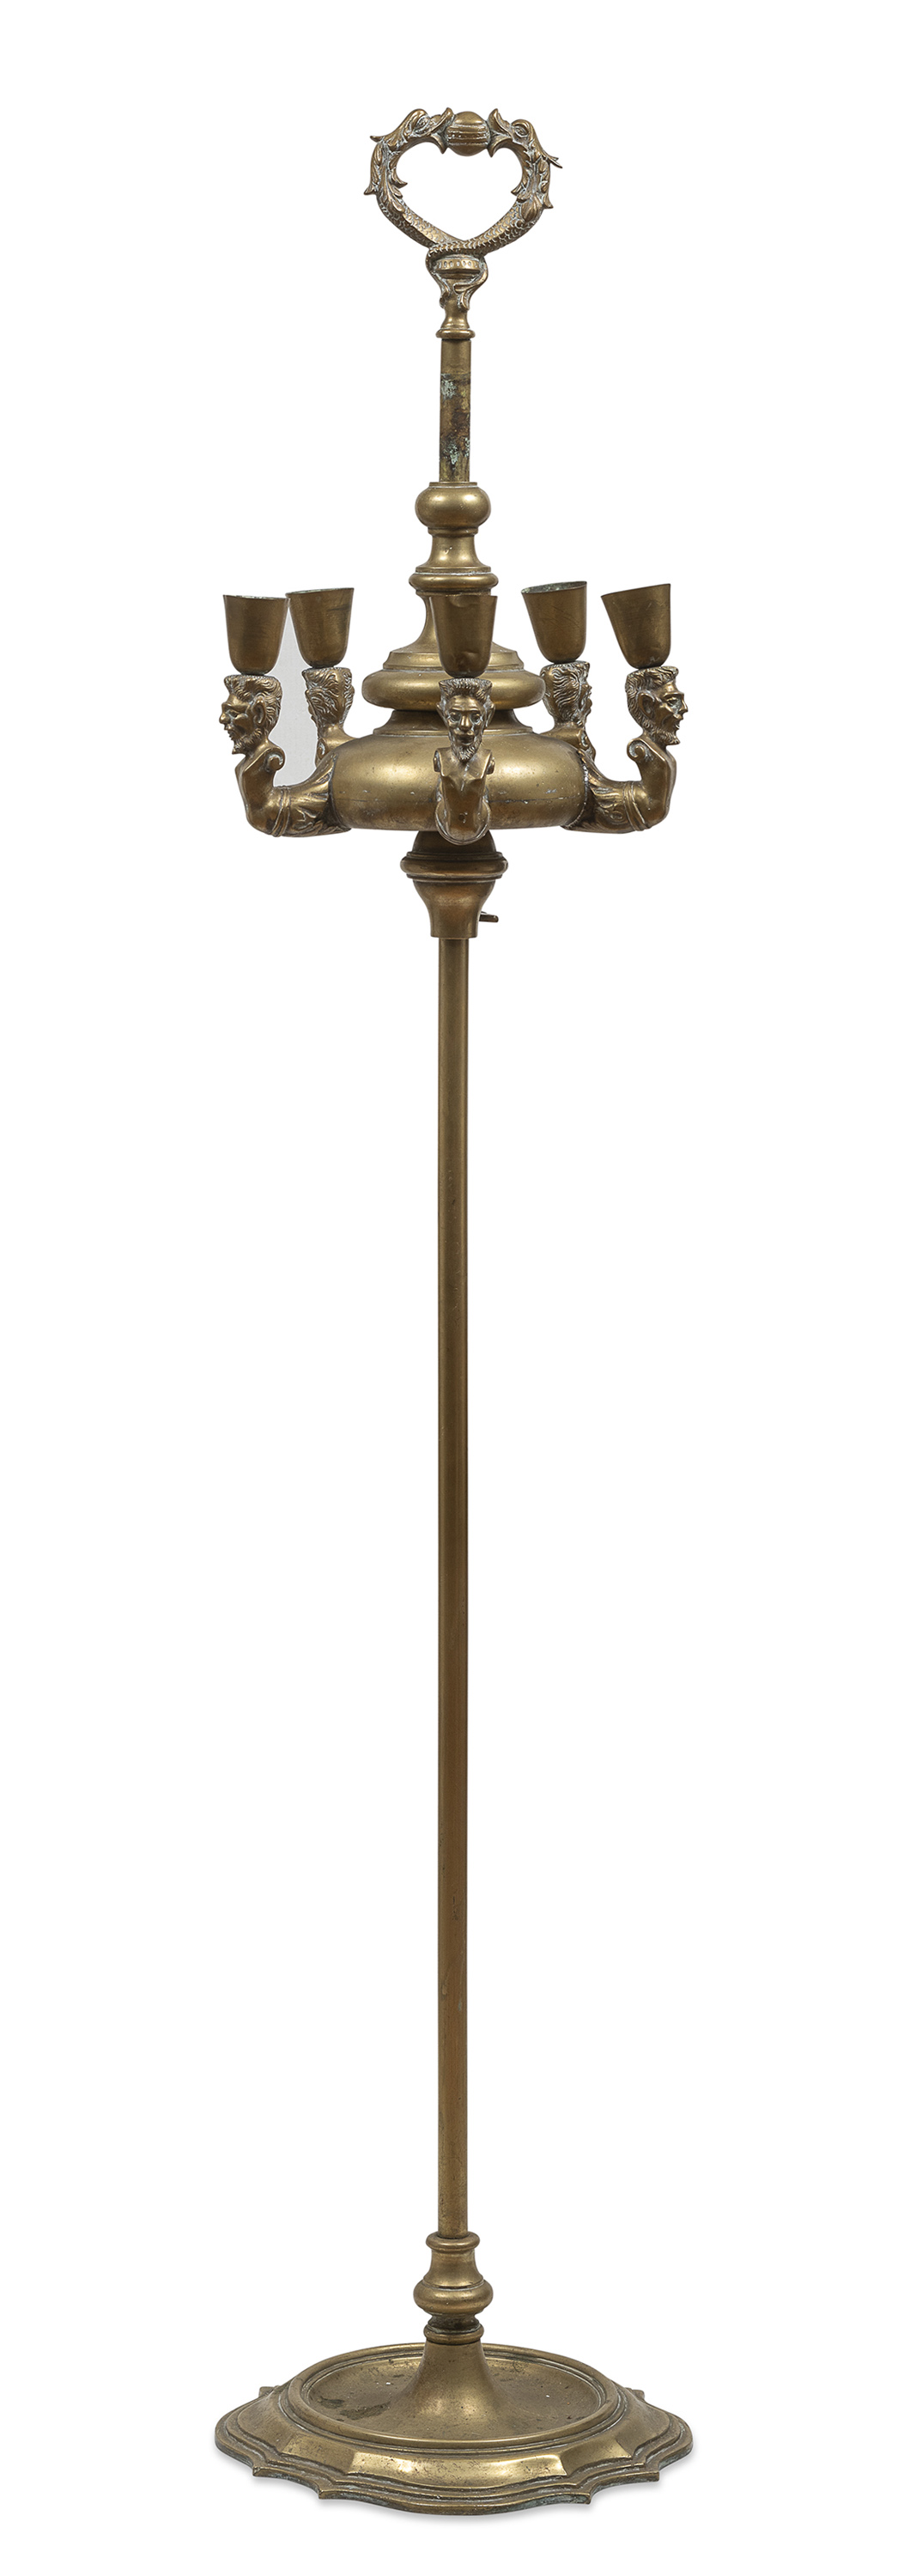 TALL FLOOR OIL LAMP IN BRASS EARLY 20TH CENTURY